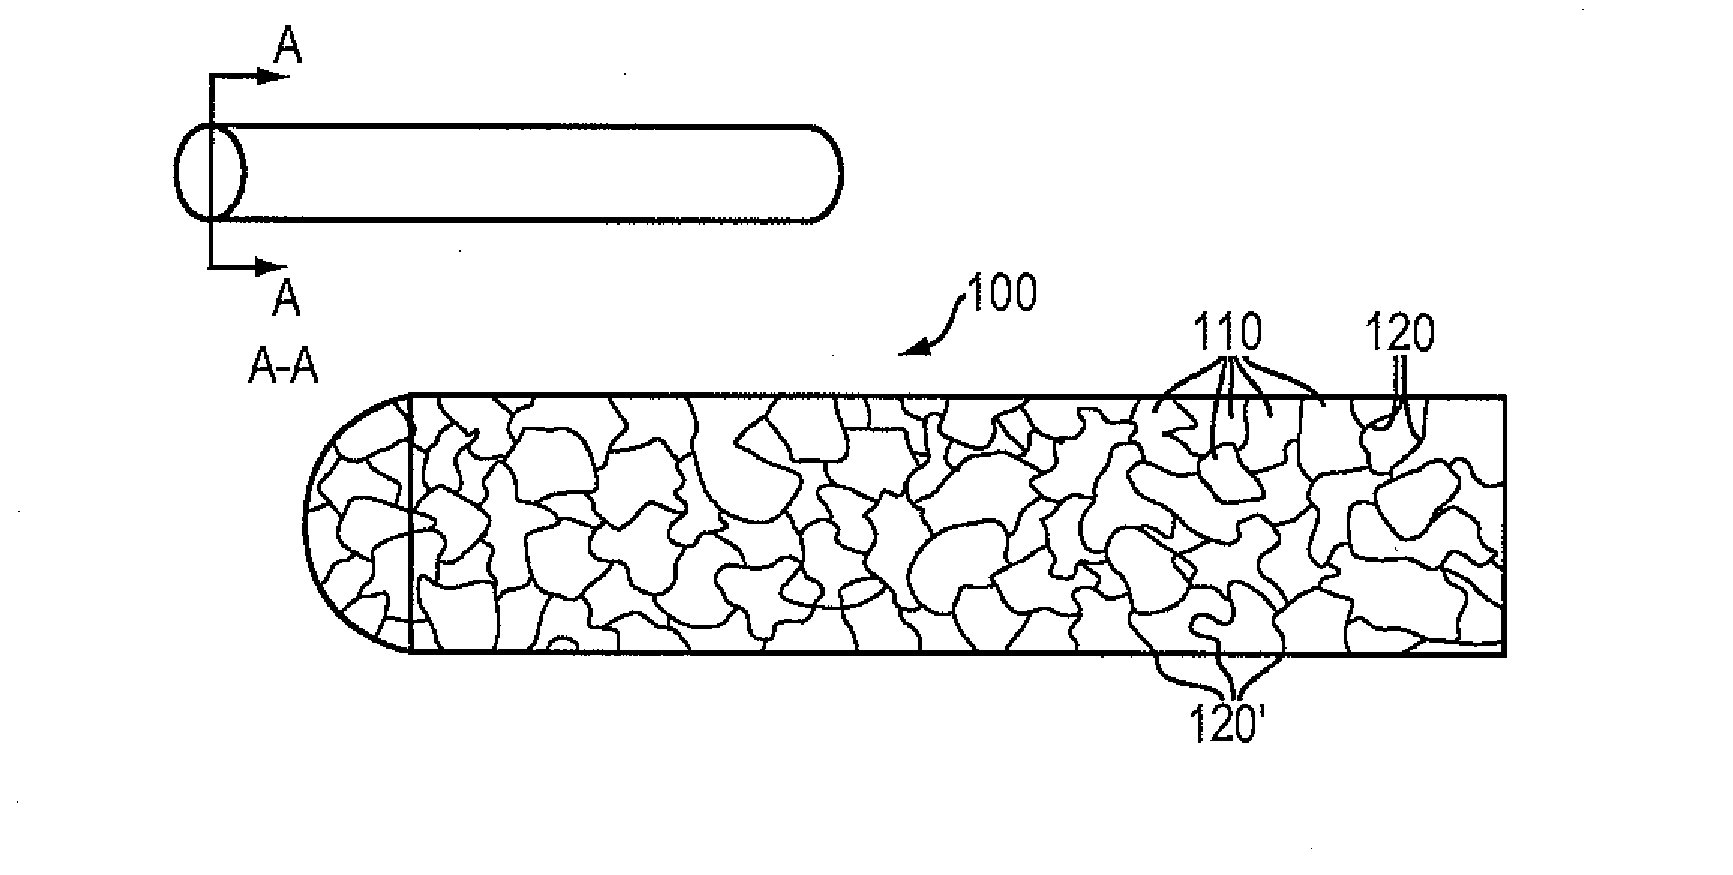 Magnesium-Based Absorbable Implants